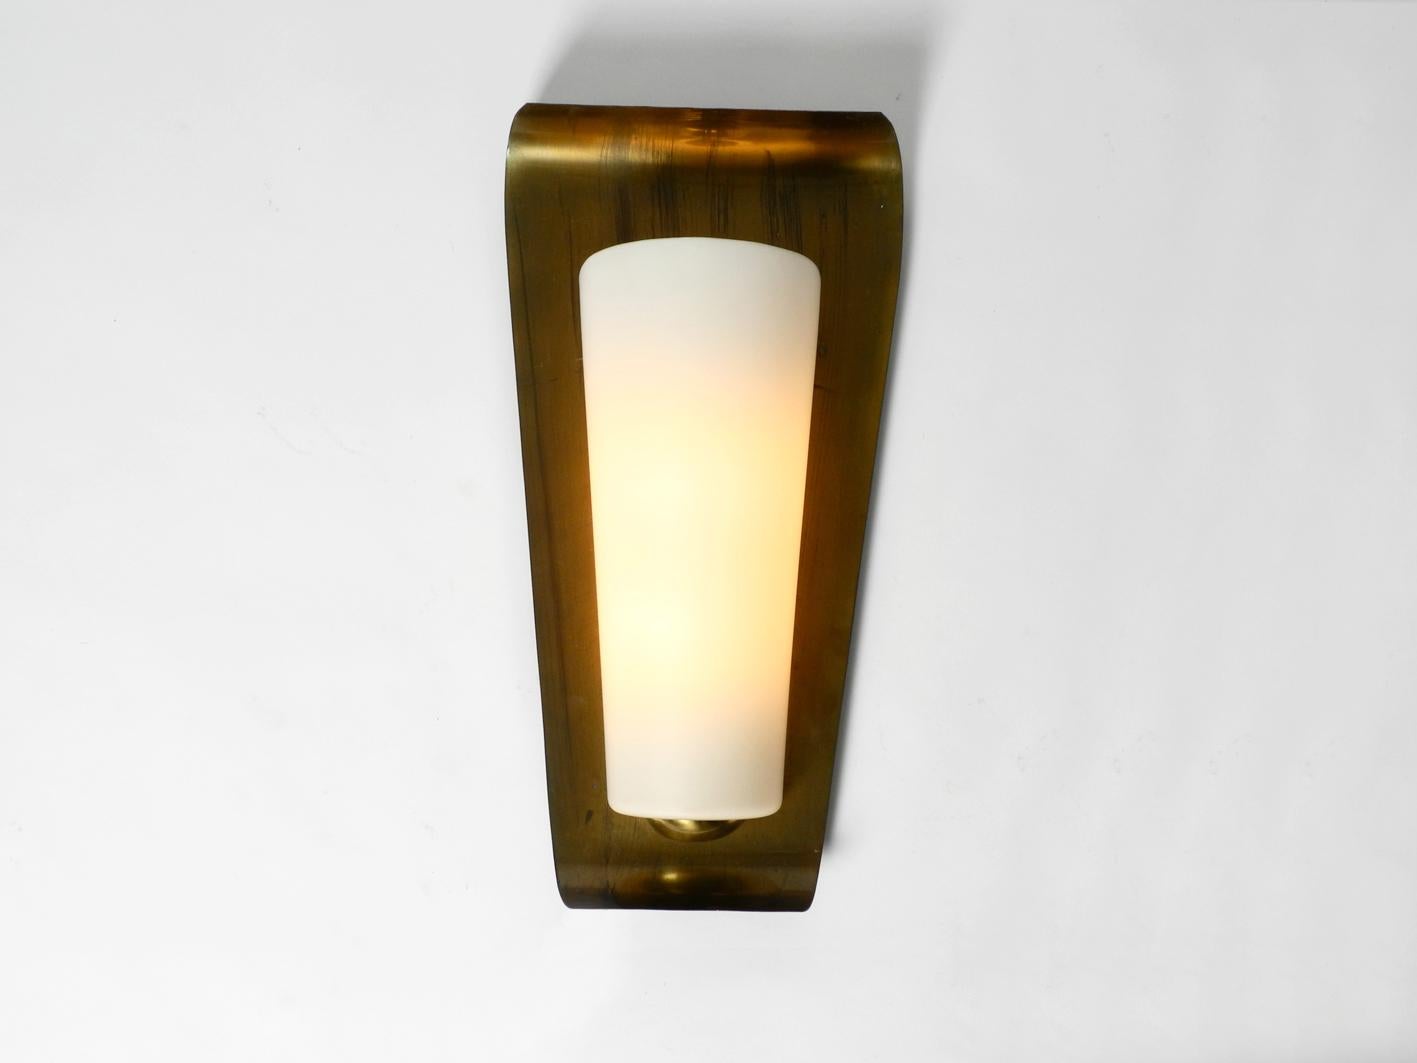 Extremely rare elegant extra large Mid-Century Modern wall sconce by Wilhelm Wagenfeld. Made by Peill & Putzler in the 1950s. These lamps were produced for churches. Nice detailed 1950s design.
Glass shade made of satin finish glass with original